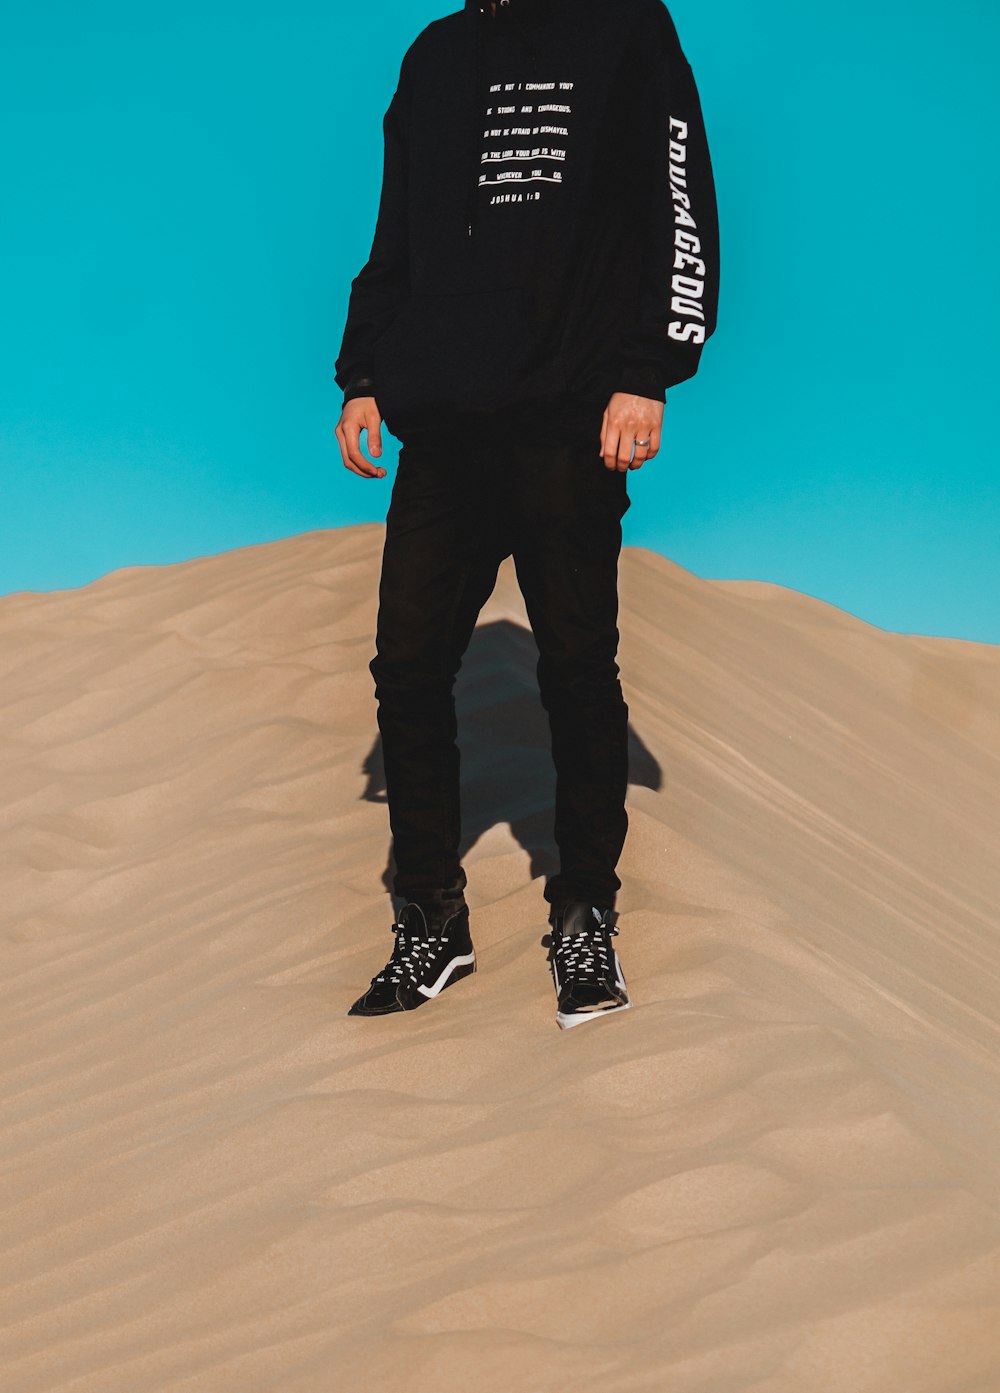 man in black jacket and black pants standing on brown sand during daytime